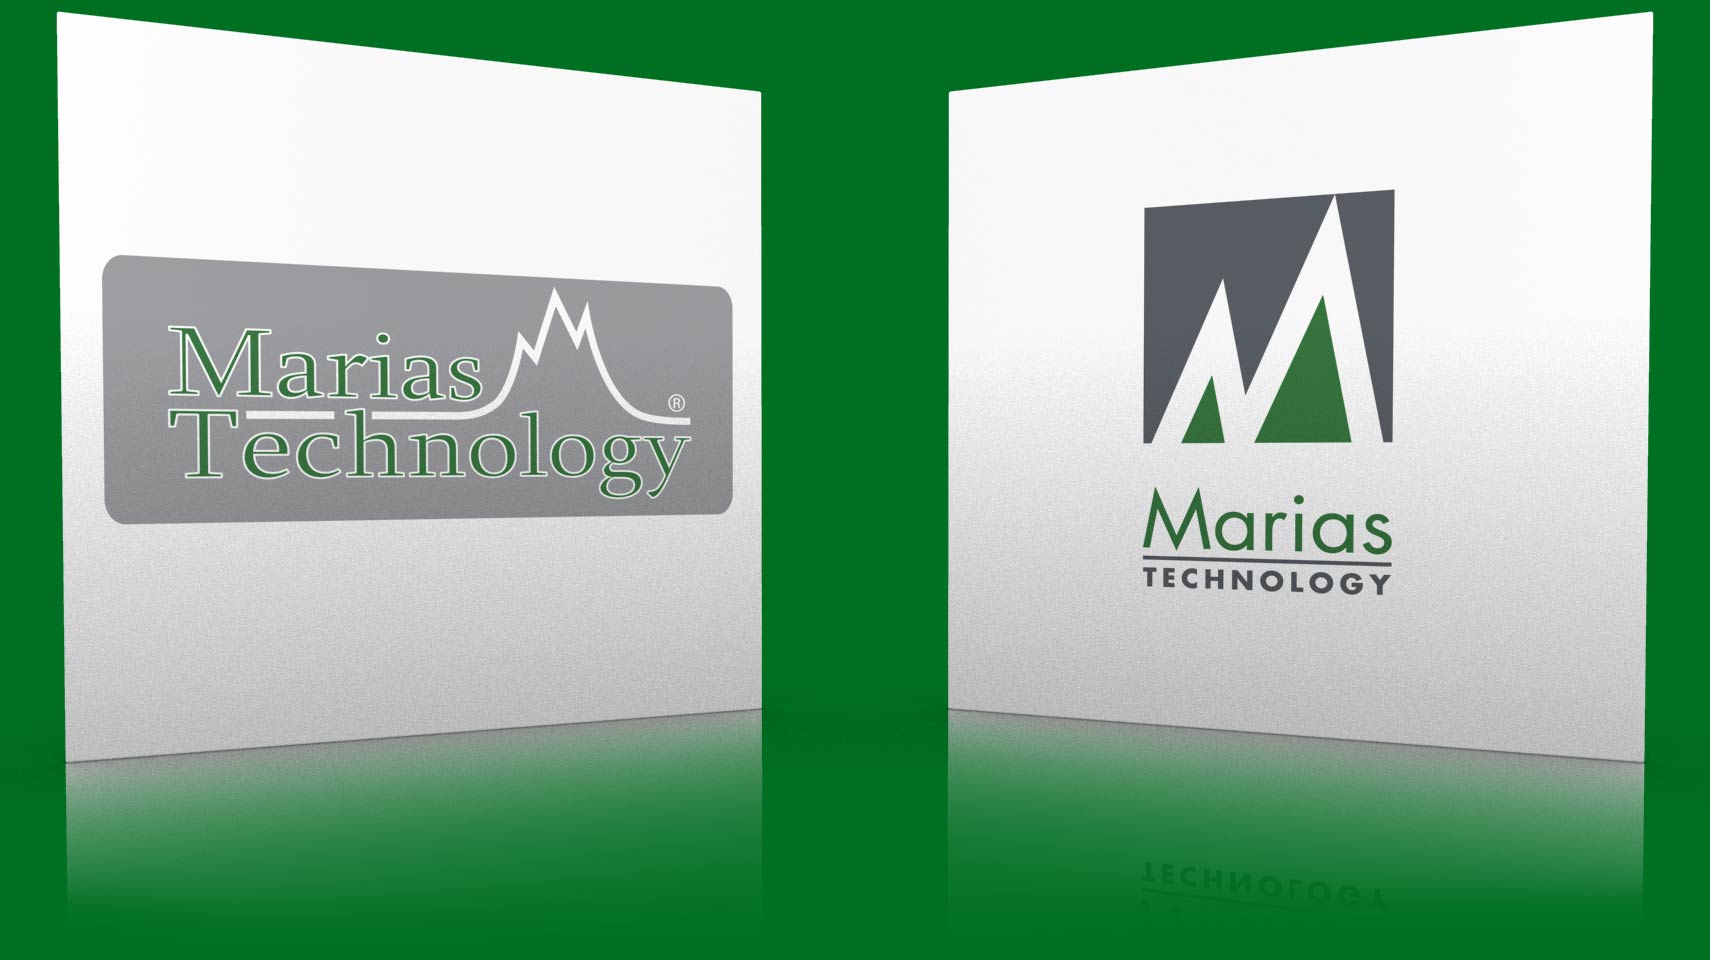 Marias Technology Identity: Before and After